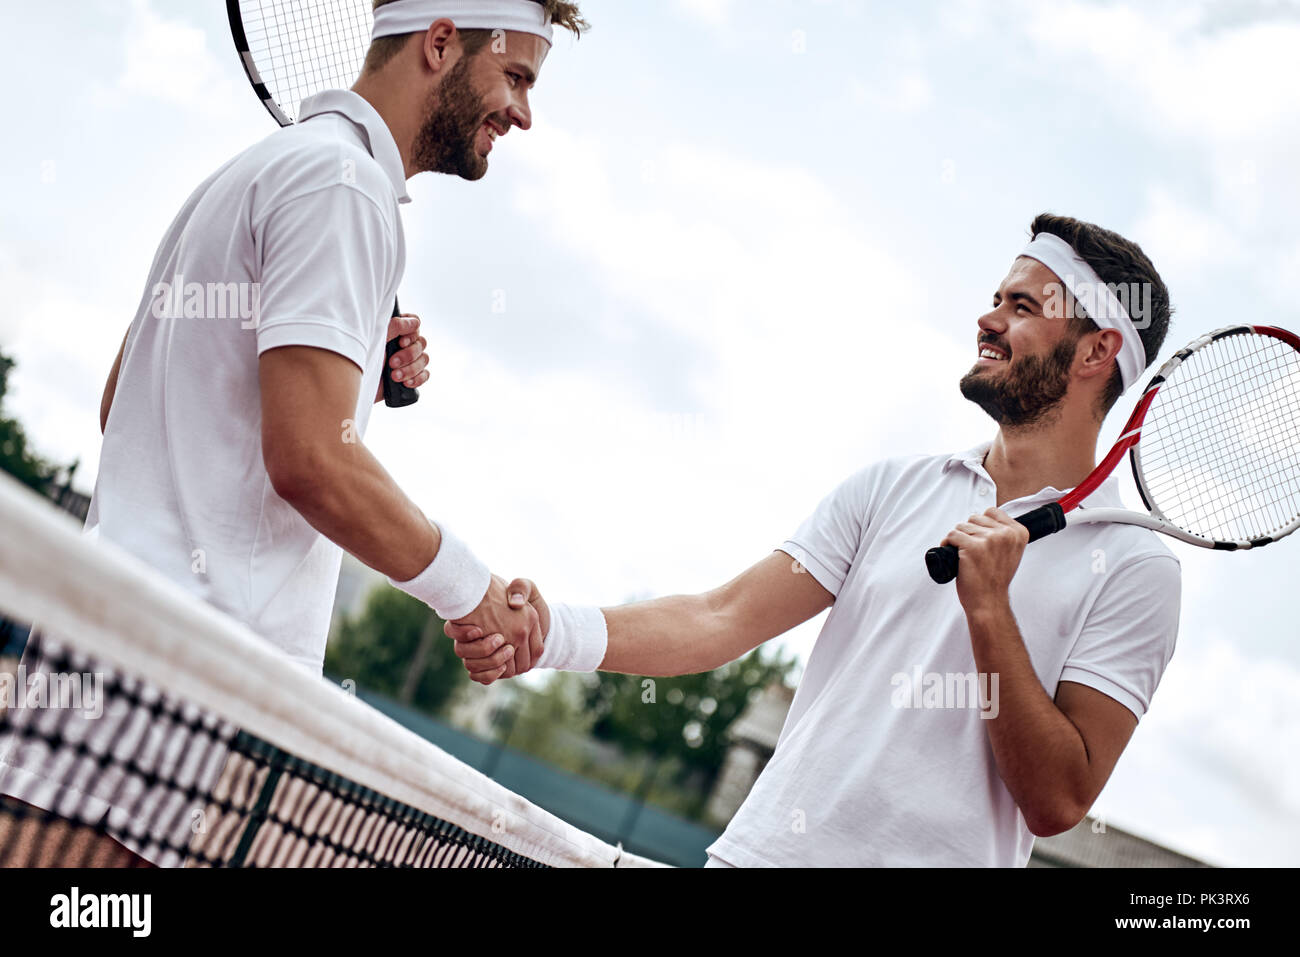 Two men, professional tennis players shake hands before and after the tennis match. One of they has the face of anger. He is trying to intimidate his opponent. Stock Photo